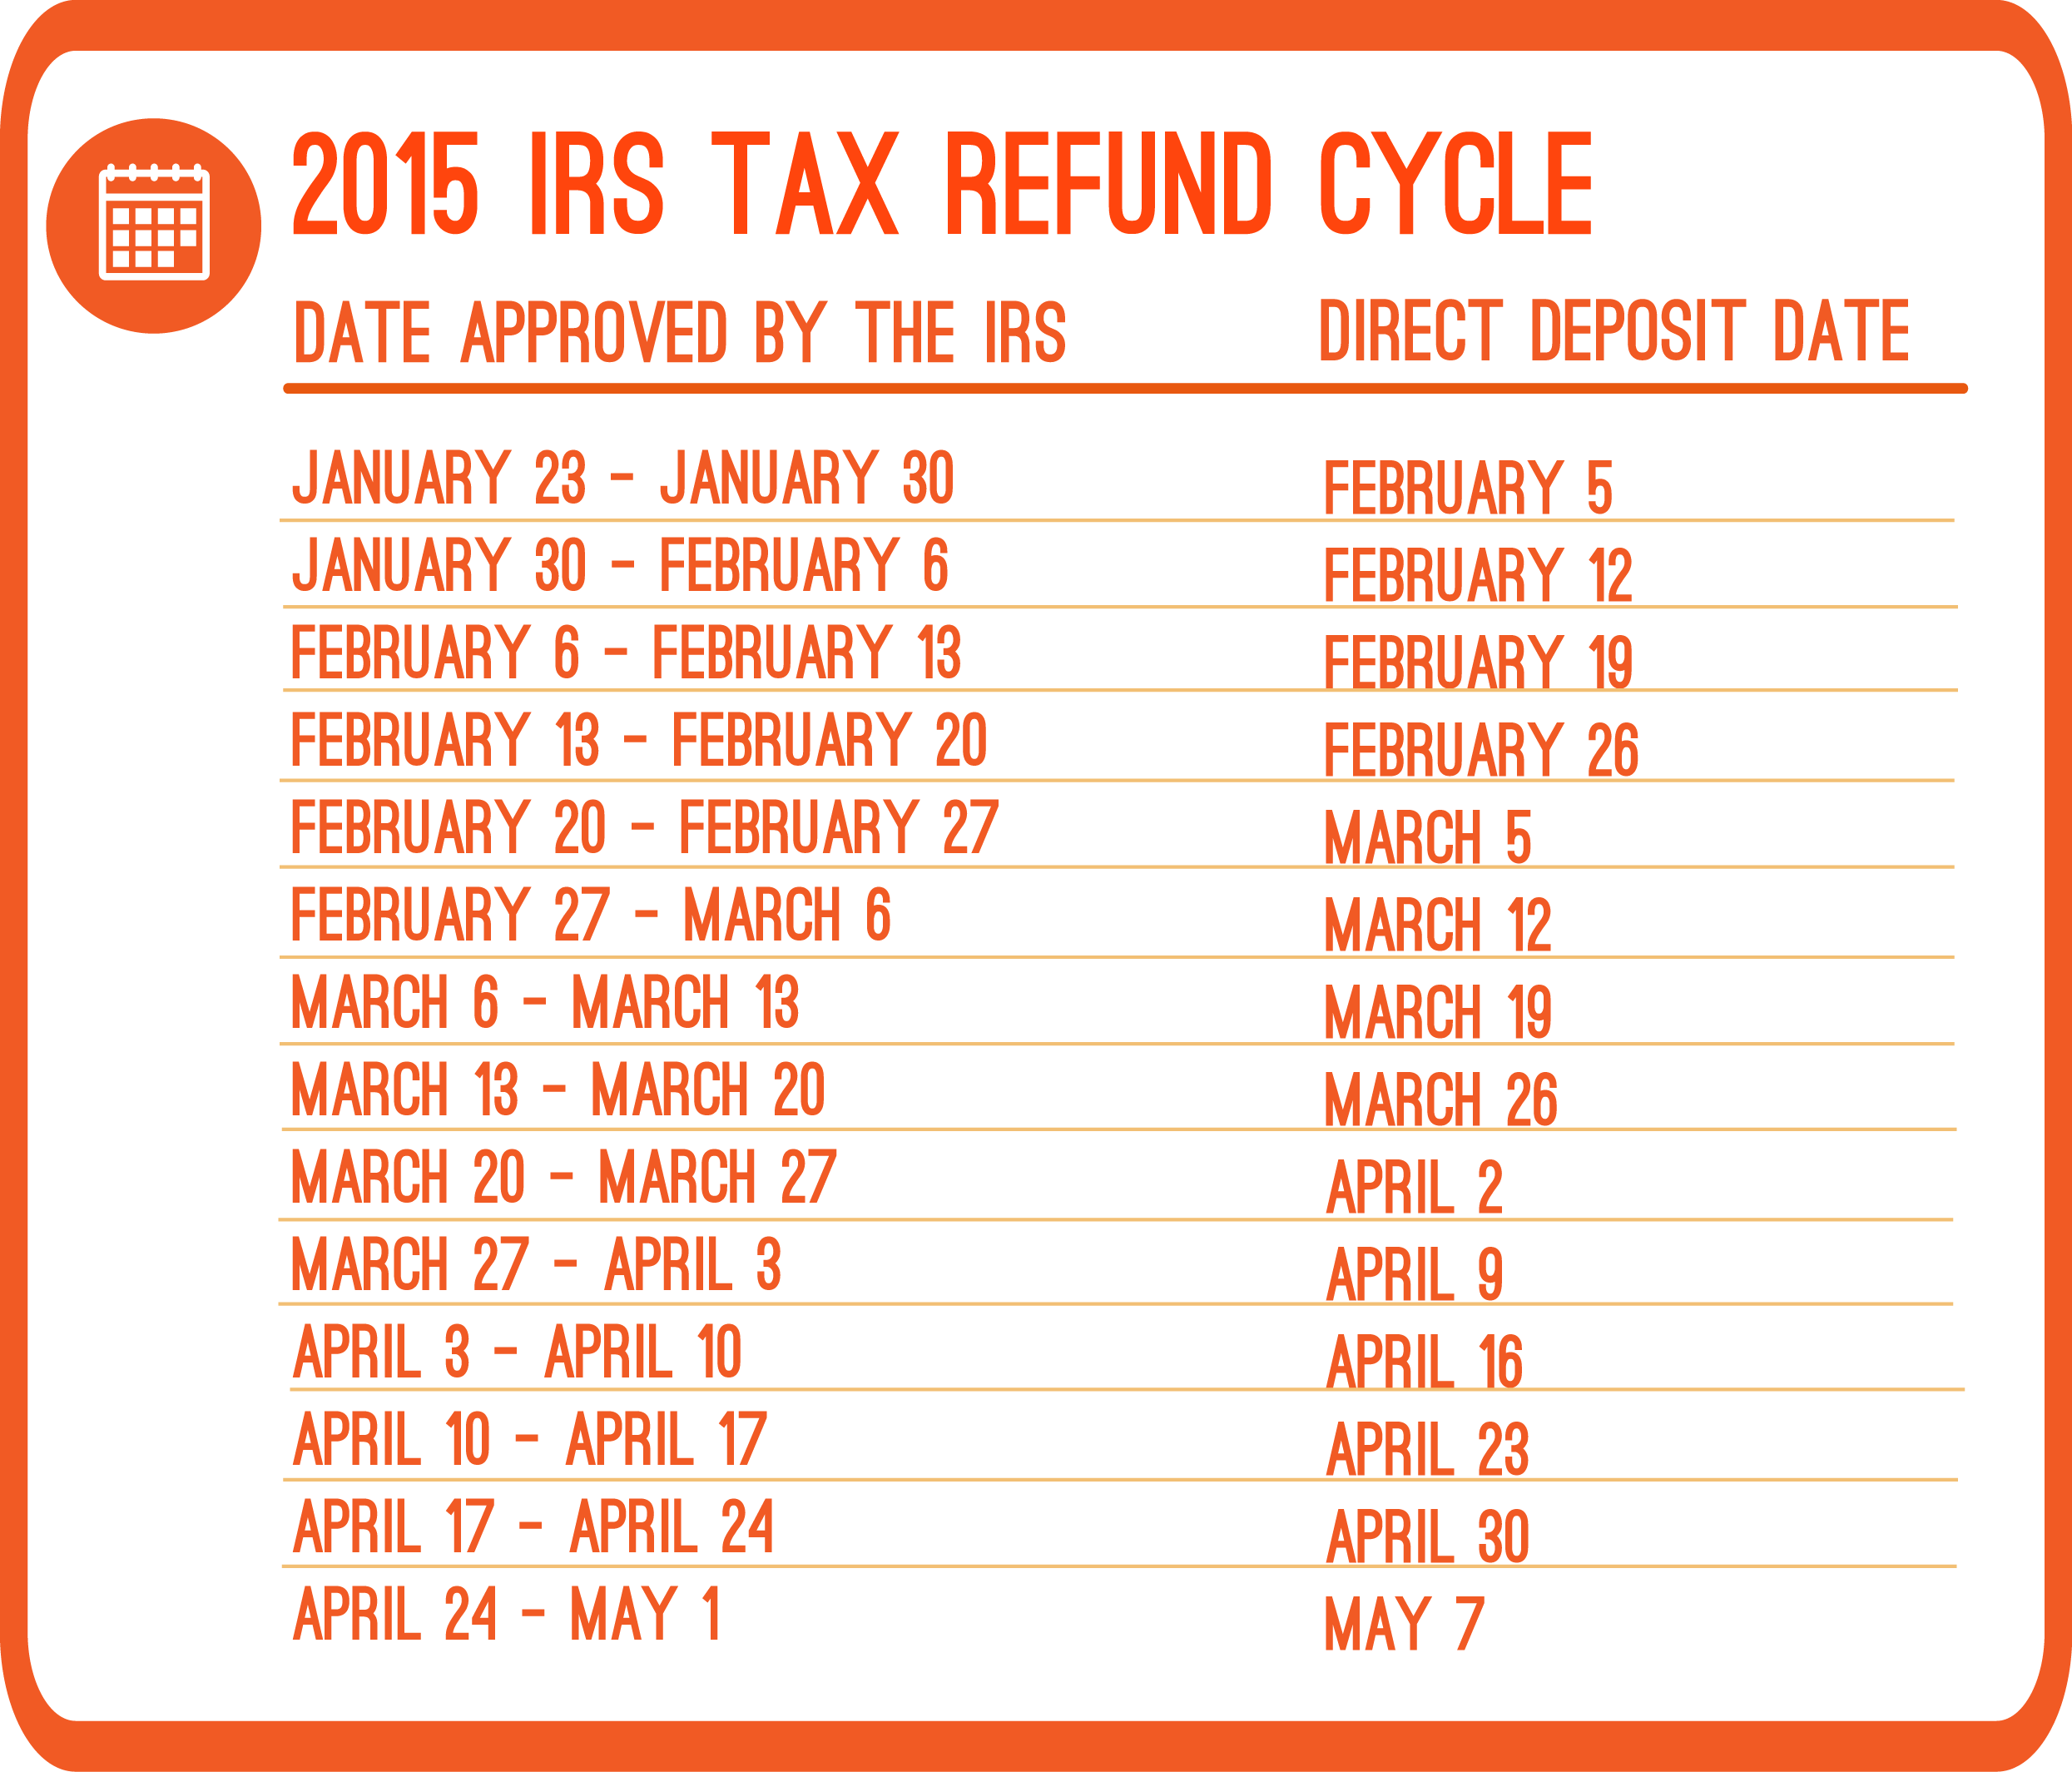 2018 Irs Refund Cycle Chart